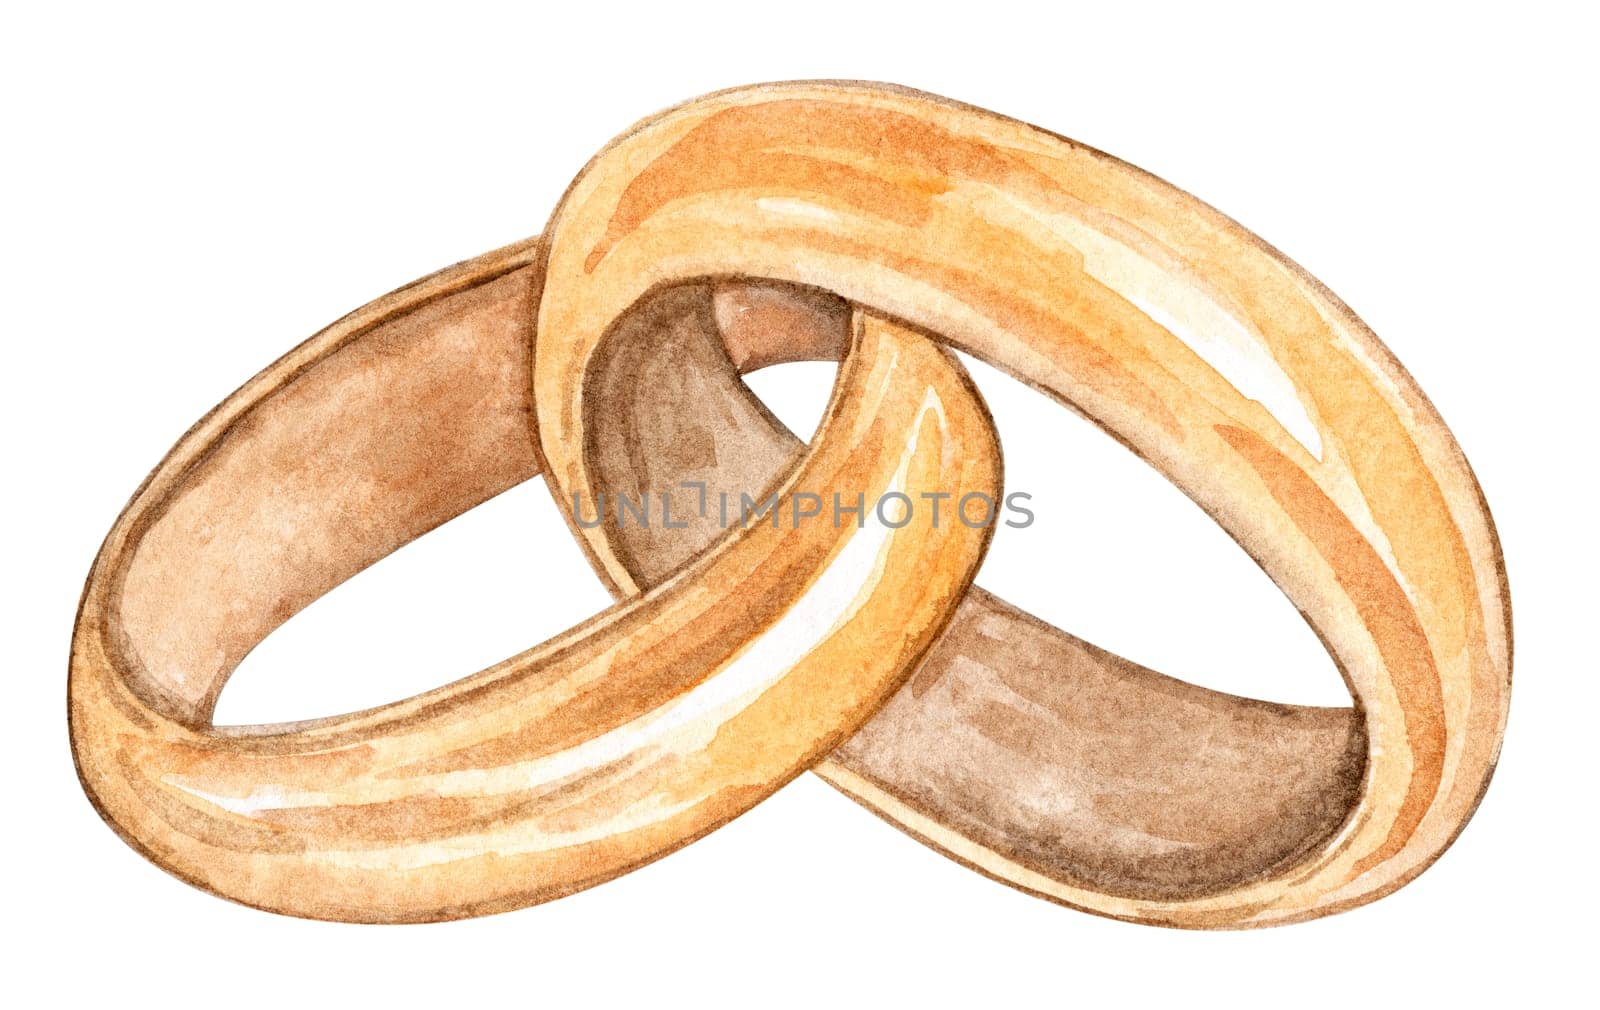 Watercolor wedding rings illustration isolated on white by dreamloud